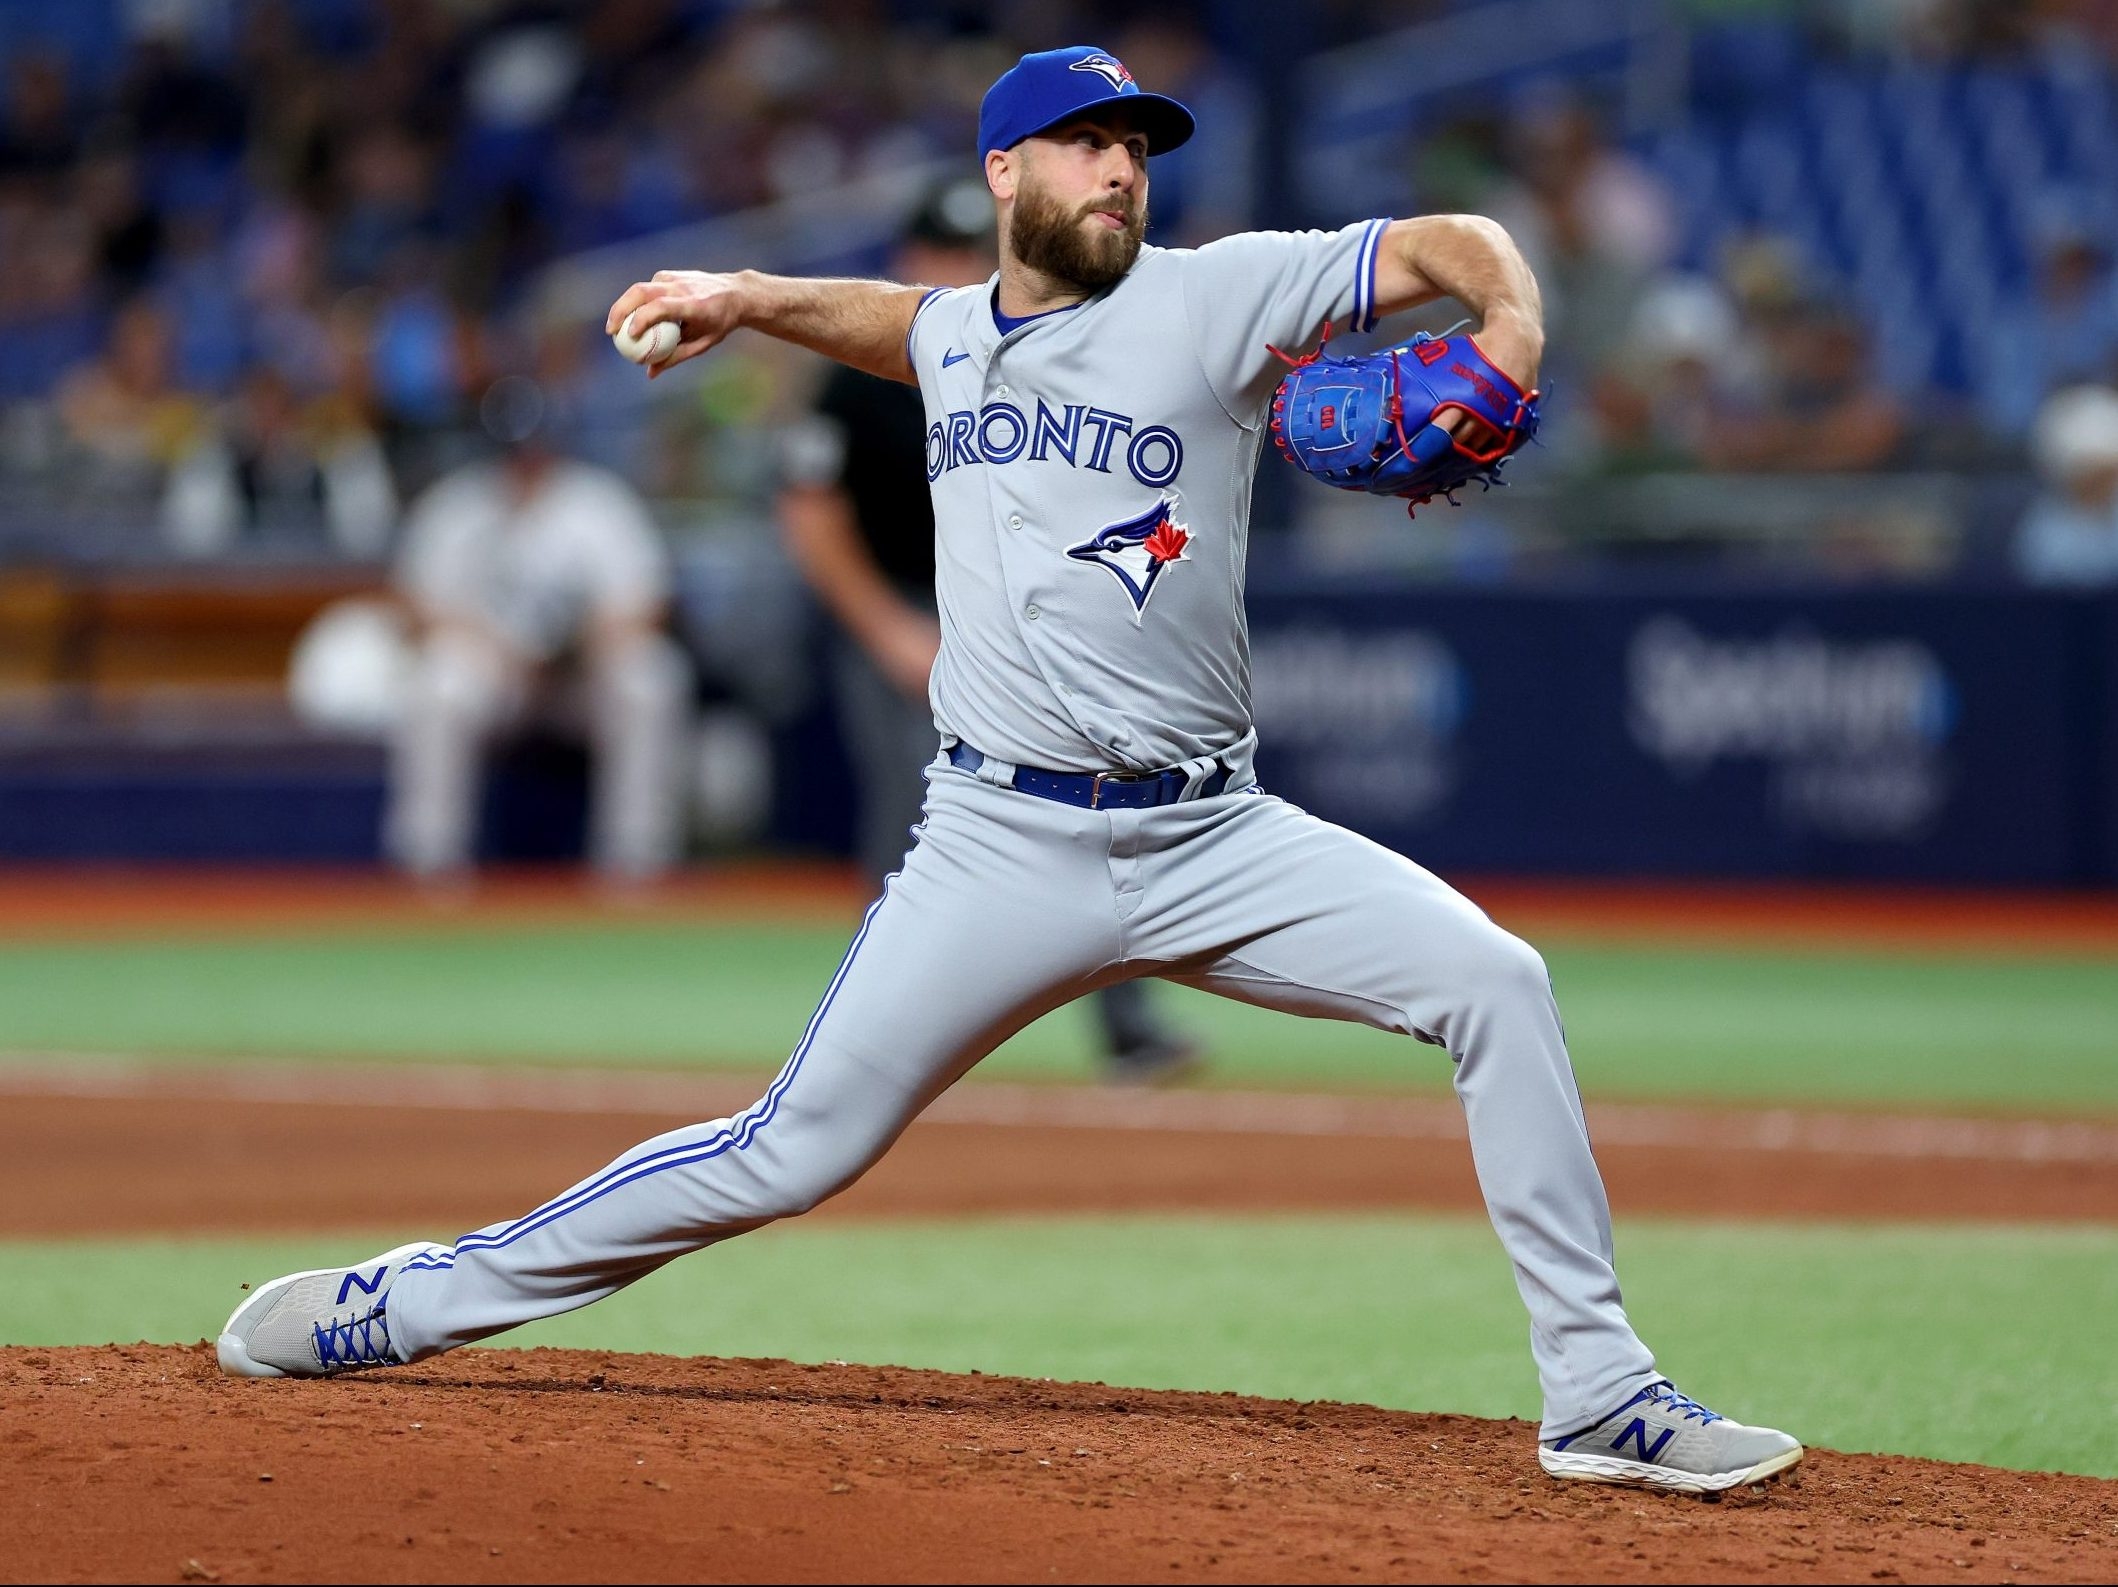 Jays Anthony Bass to catch ceremonial first pitch on Pride Weekend